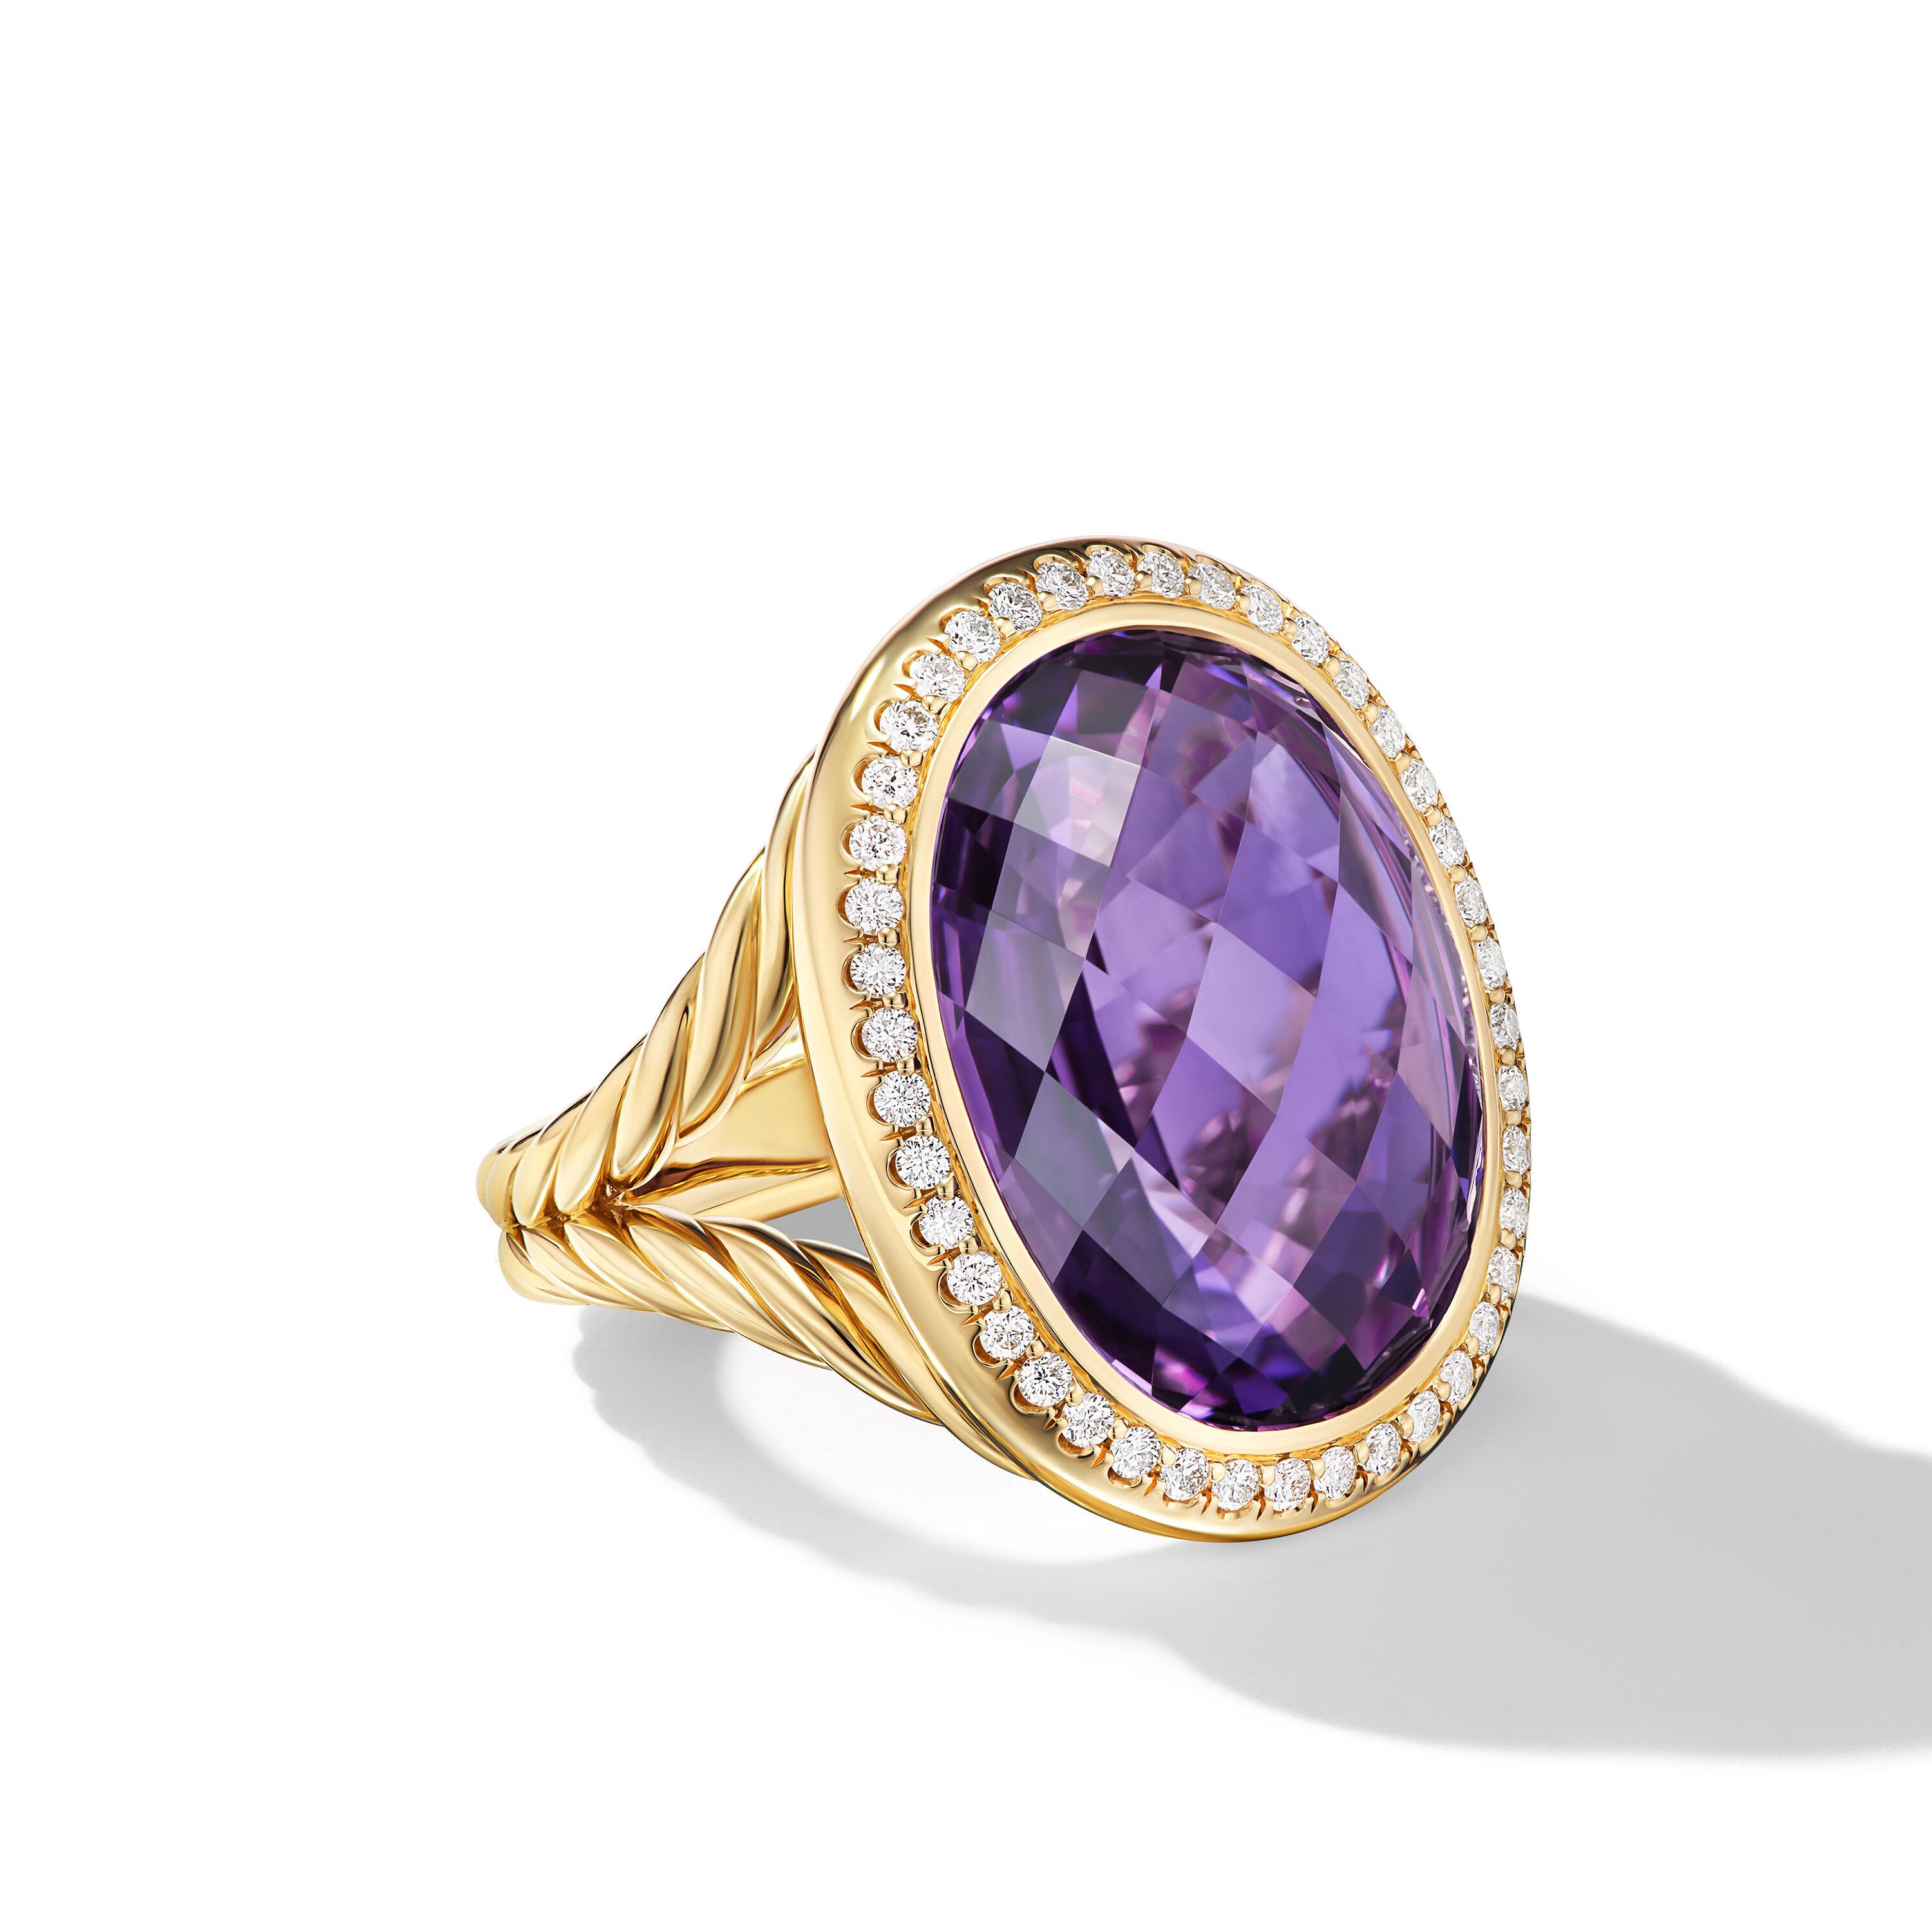 David Yurman Albion Oval Ring in 18K Yellow Gold with Amethyst and Diamonds